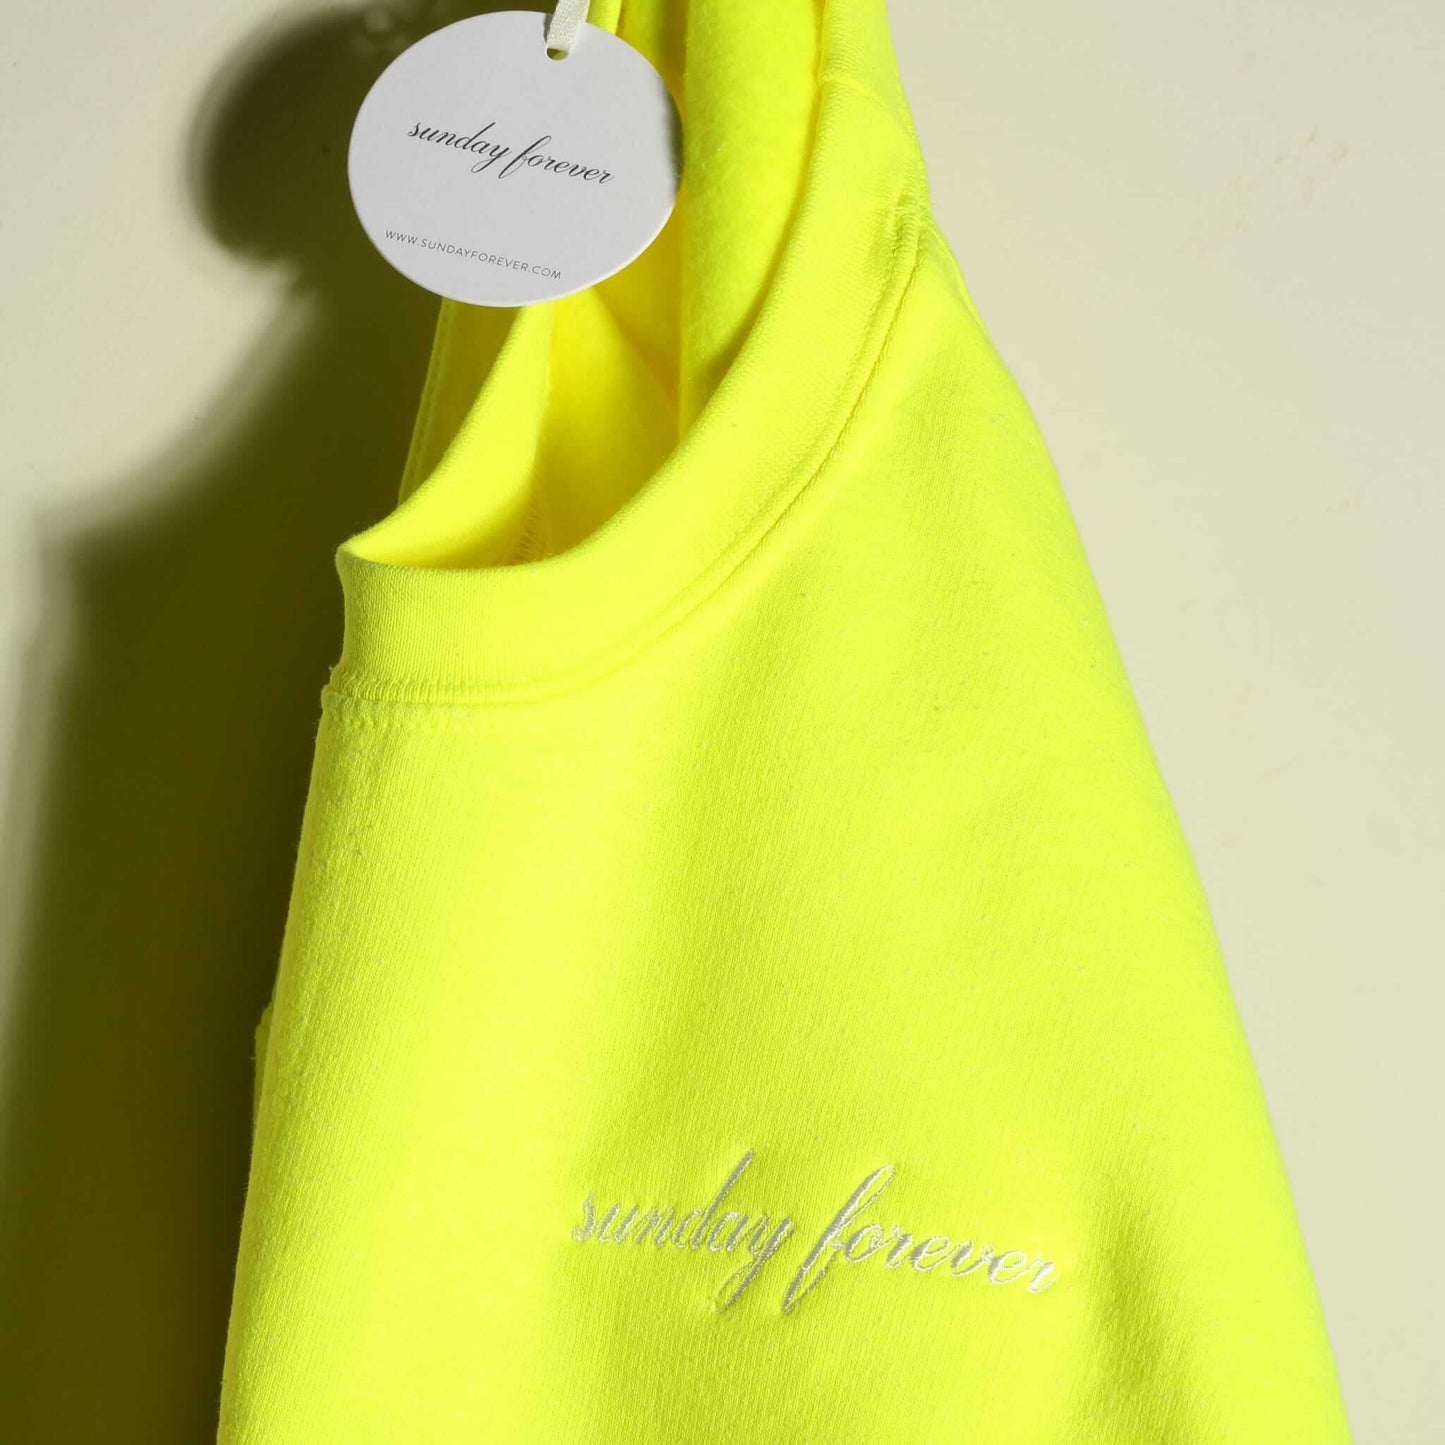 Sunday Forever Highlighter Yellow Embroidered Crewneck